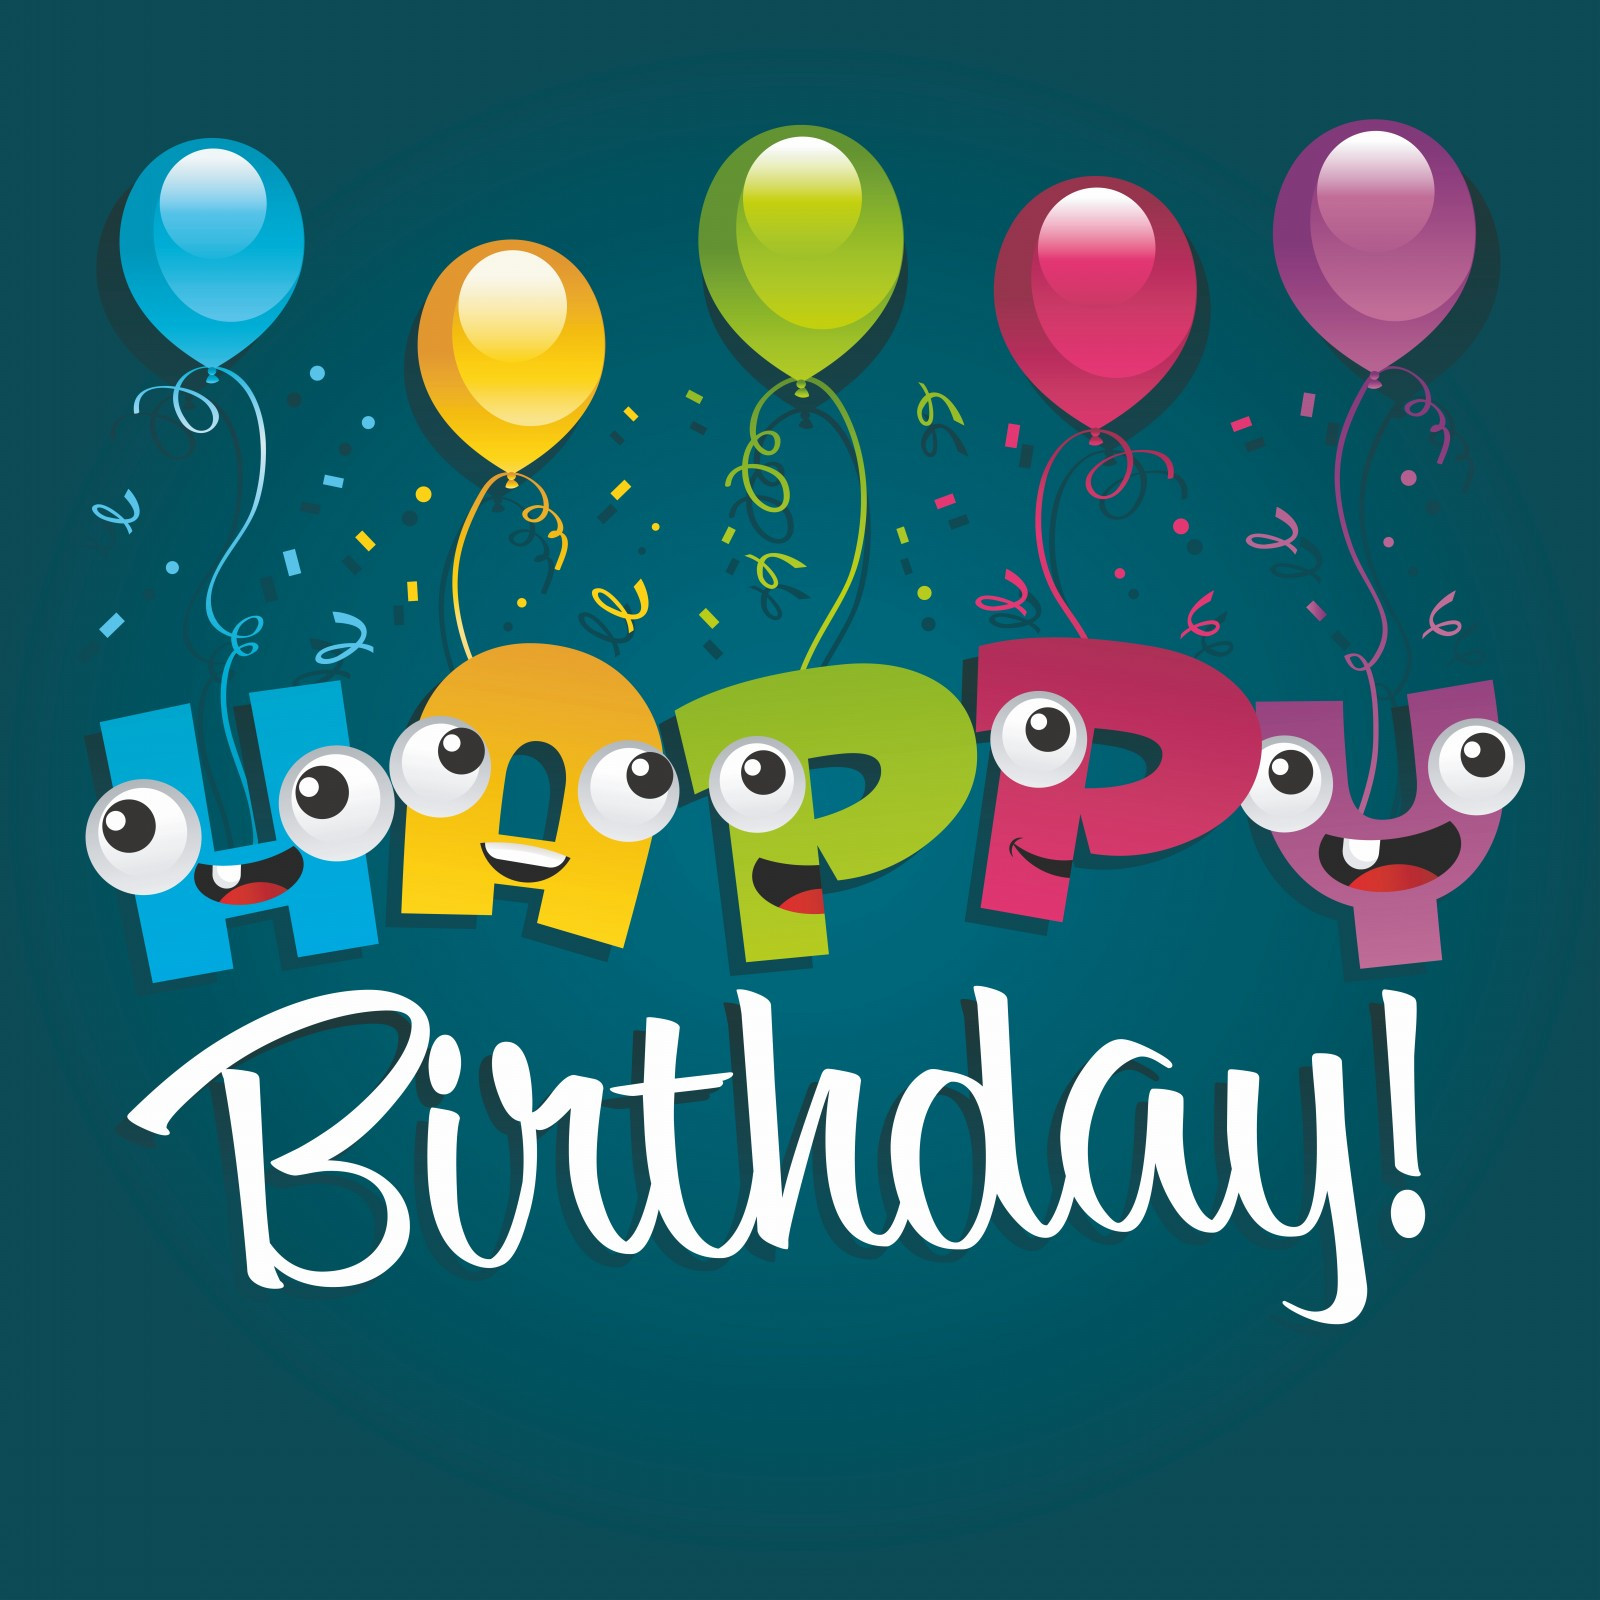 Happy Birthday Card
 35 Happy Birthday Cards Free To Download – The WoW Style